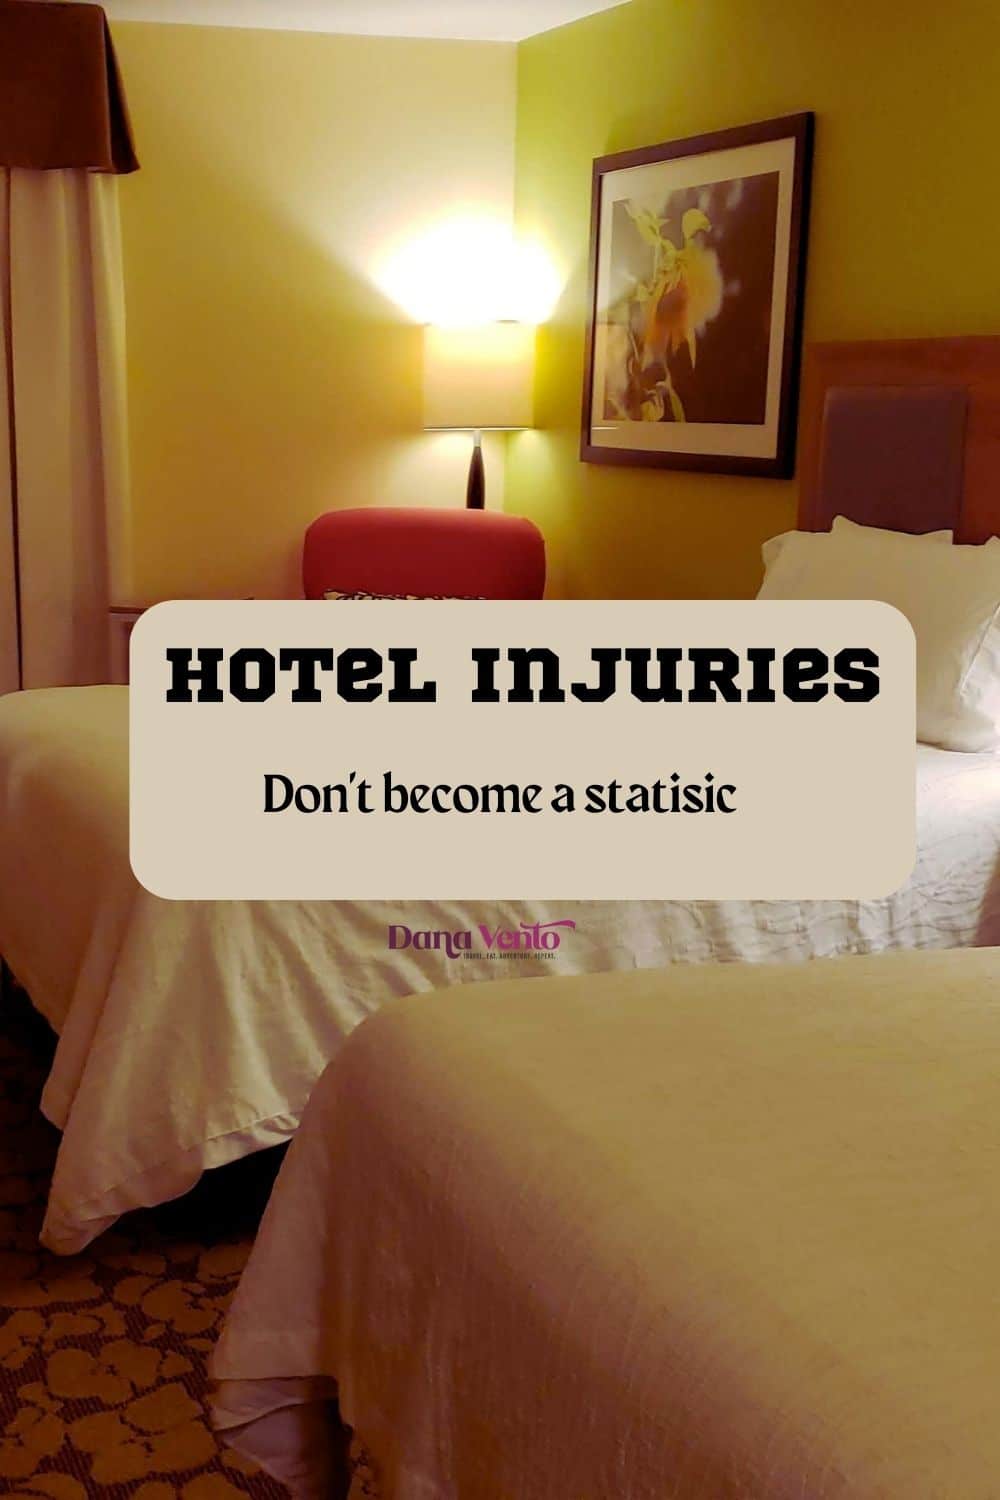 Hotel Sustained Injuries And A Hotel Room